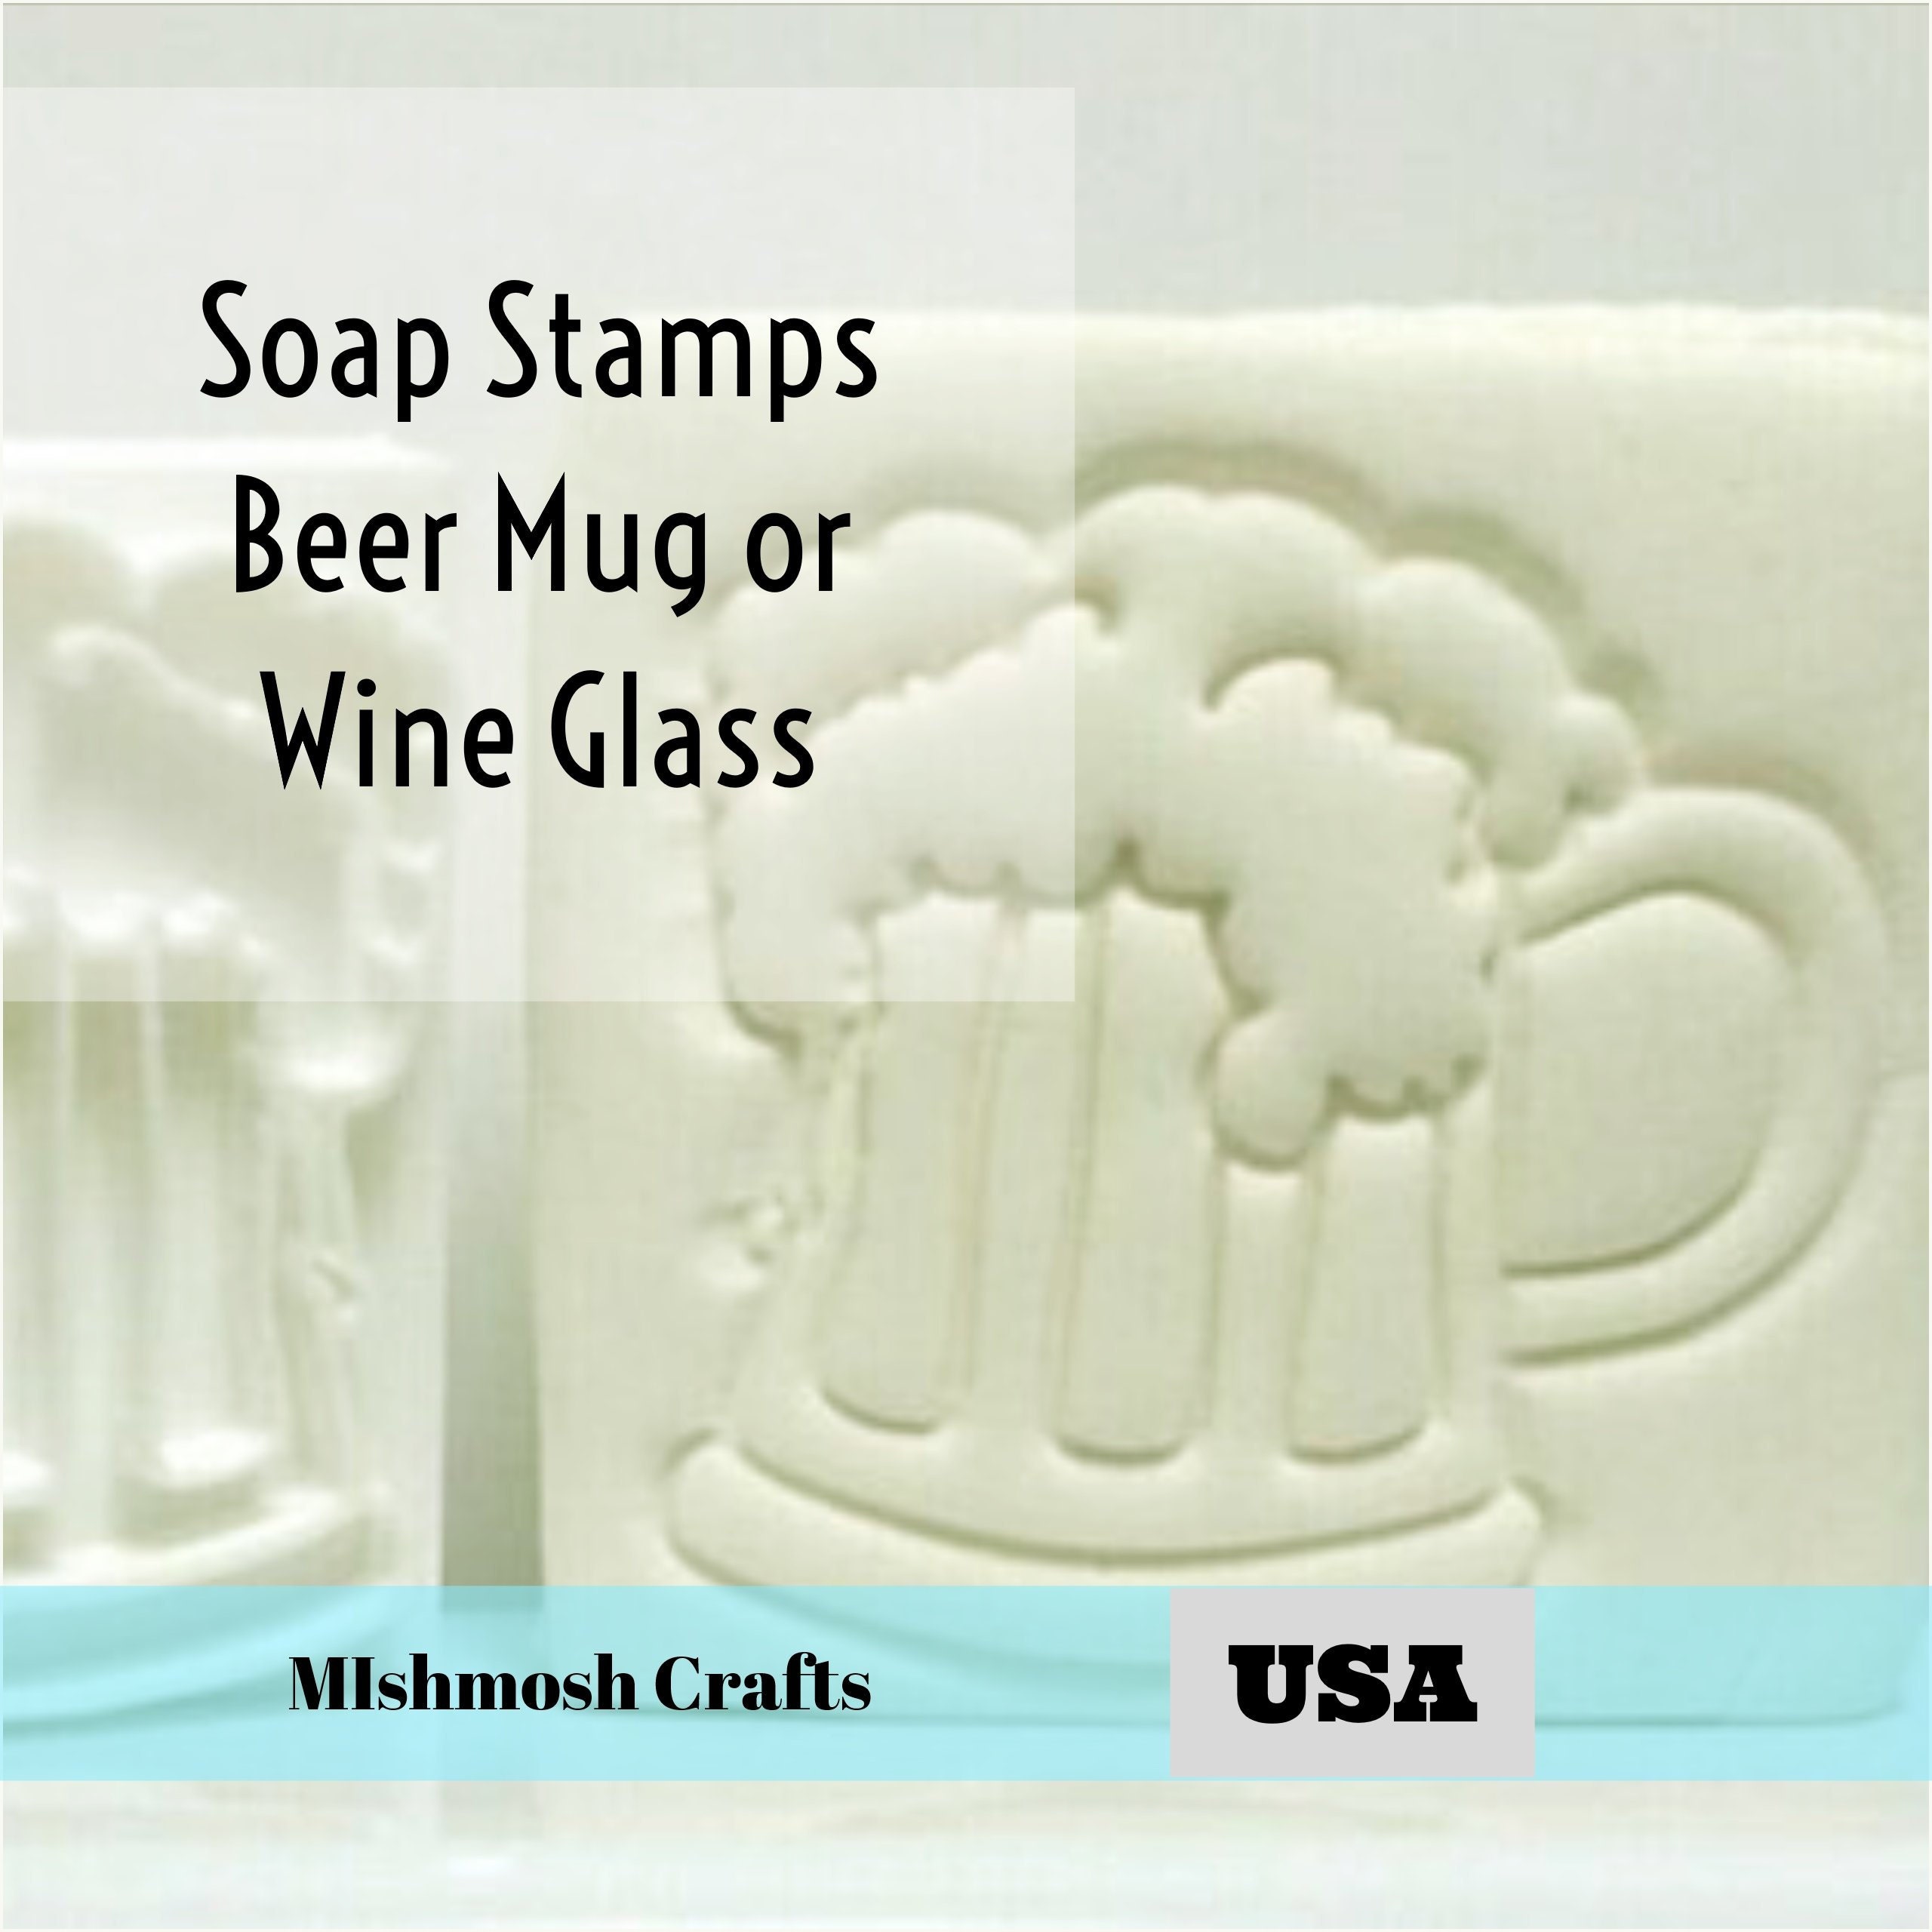 Herb & Scent Soap Stamp: Mint, Sage, Rosemary, Patchouli, Cotton